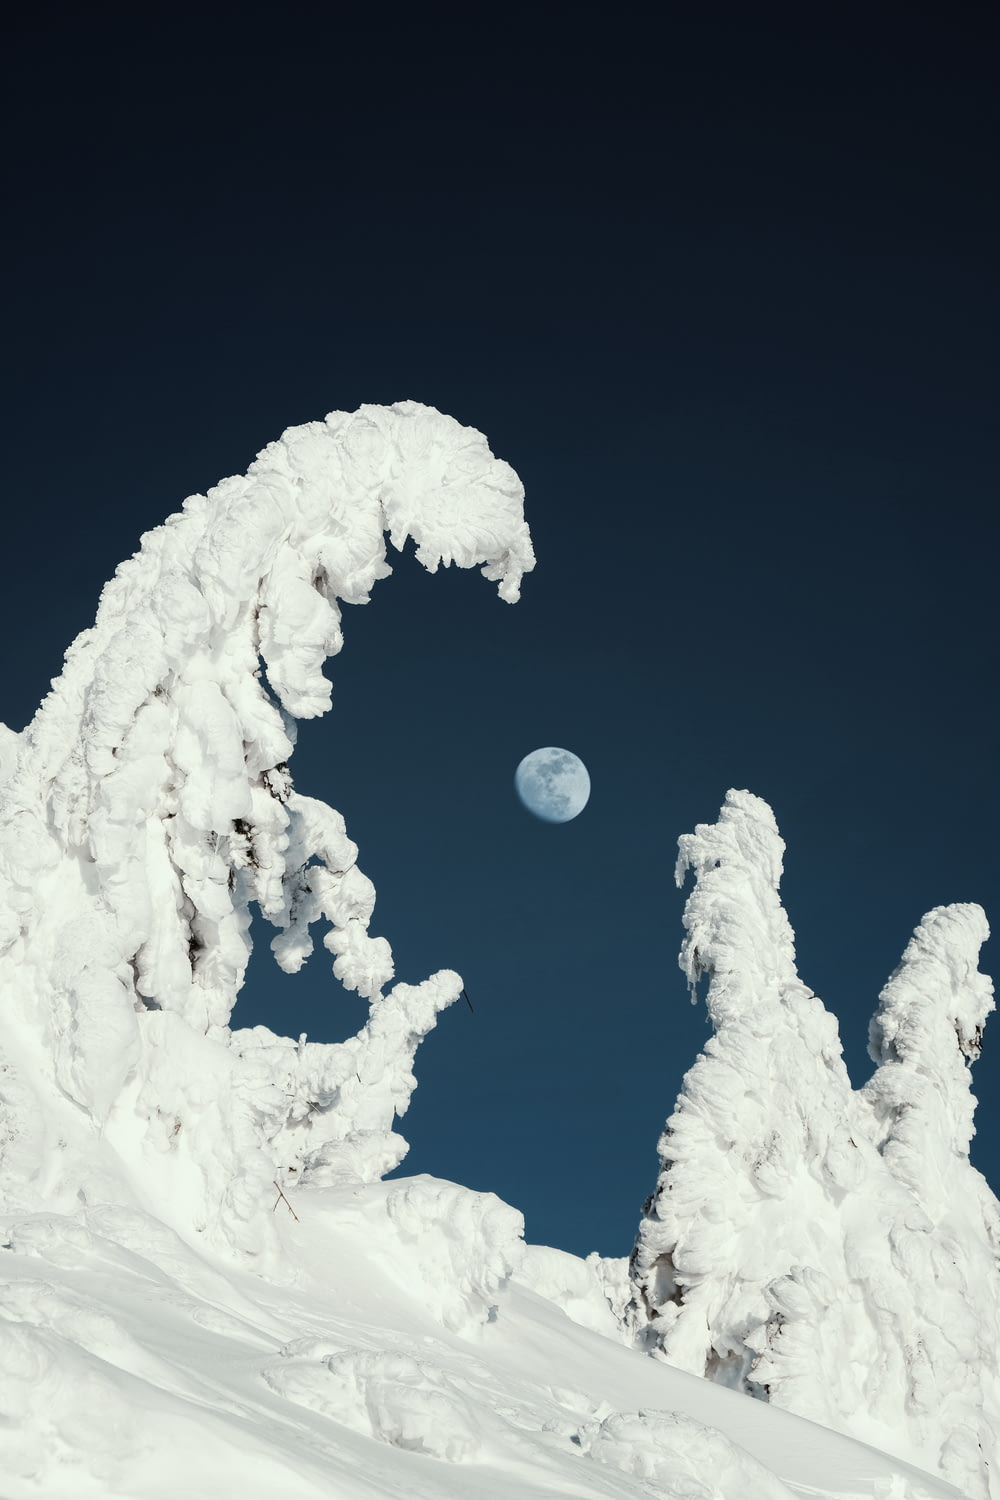 a snow covered mountain with a full moon in the sky